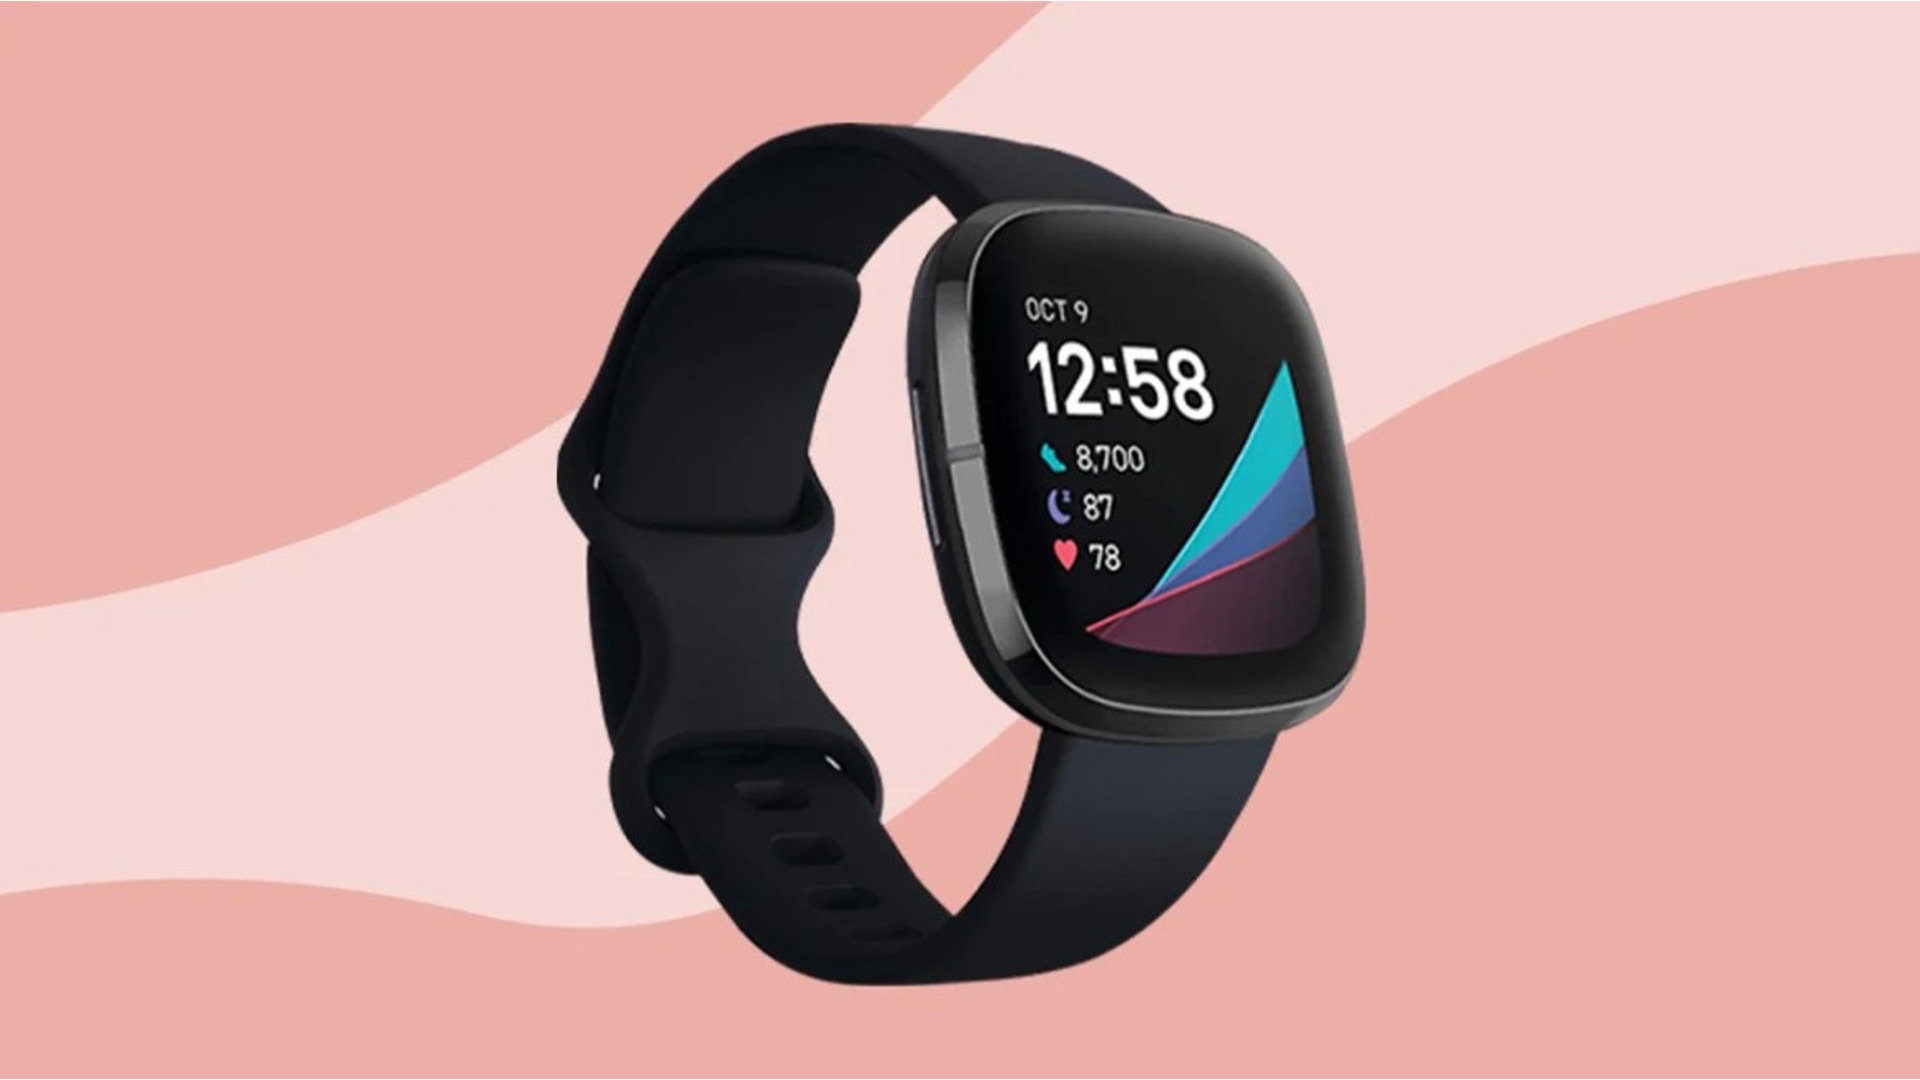 Power Down: Turning Off Your Fitbit Sense